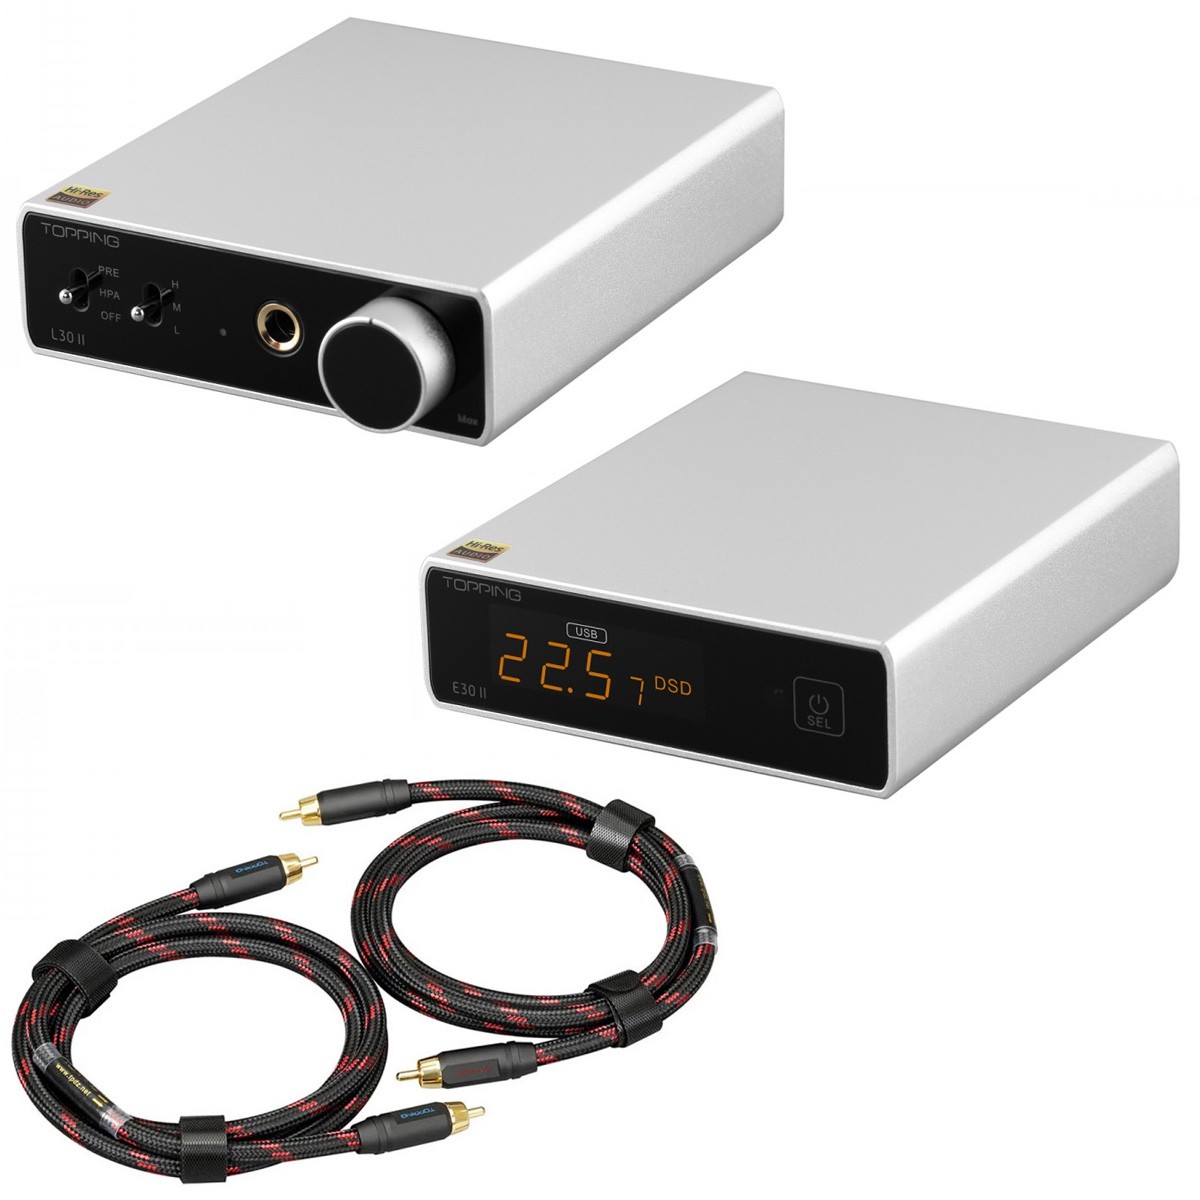 Pack Topping E30 II DAC AK4493S + Topping L30 II Amplificateur Casque NFCA + Topping TCR2 Câble RCA 25cm Silver